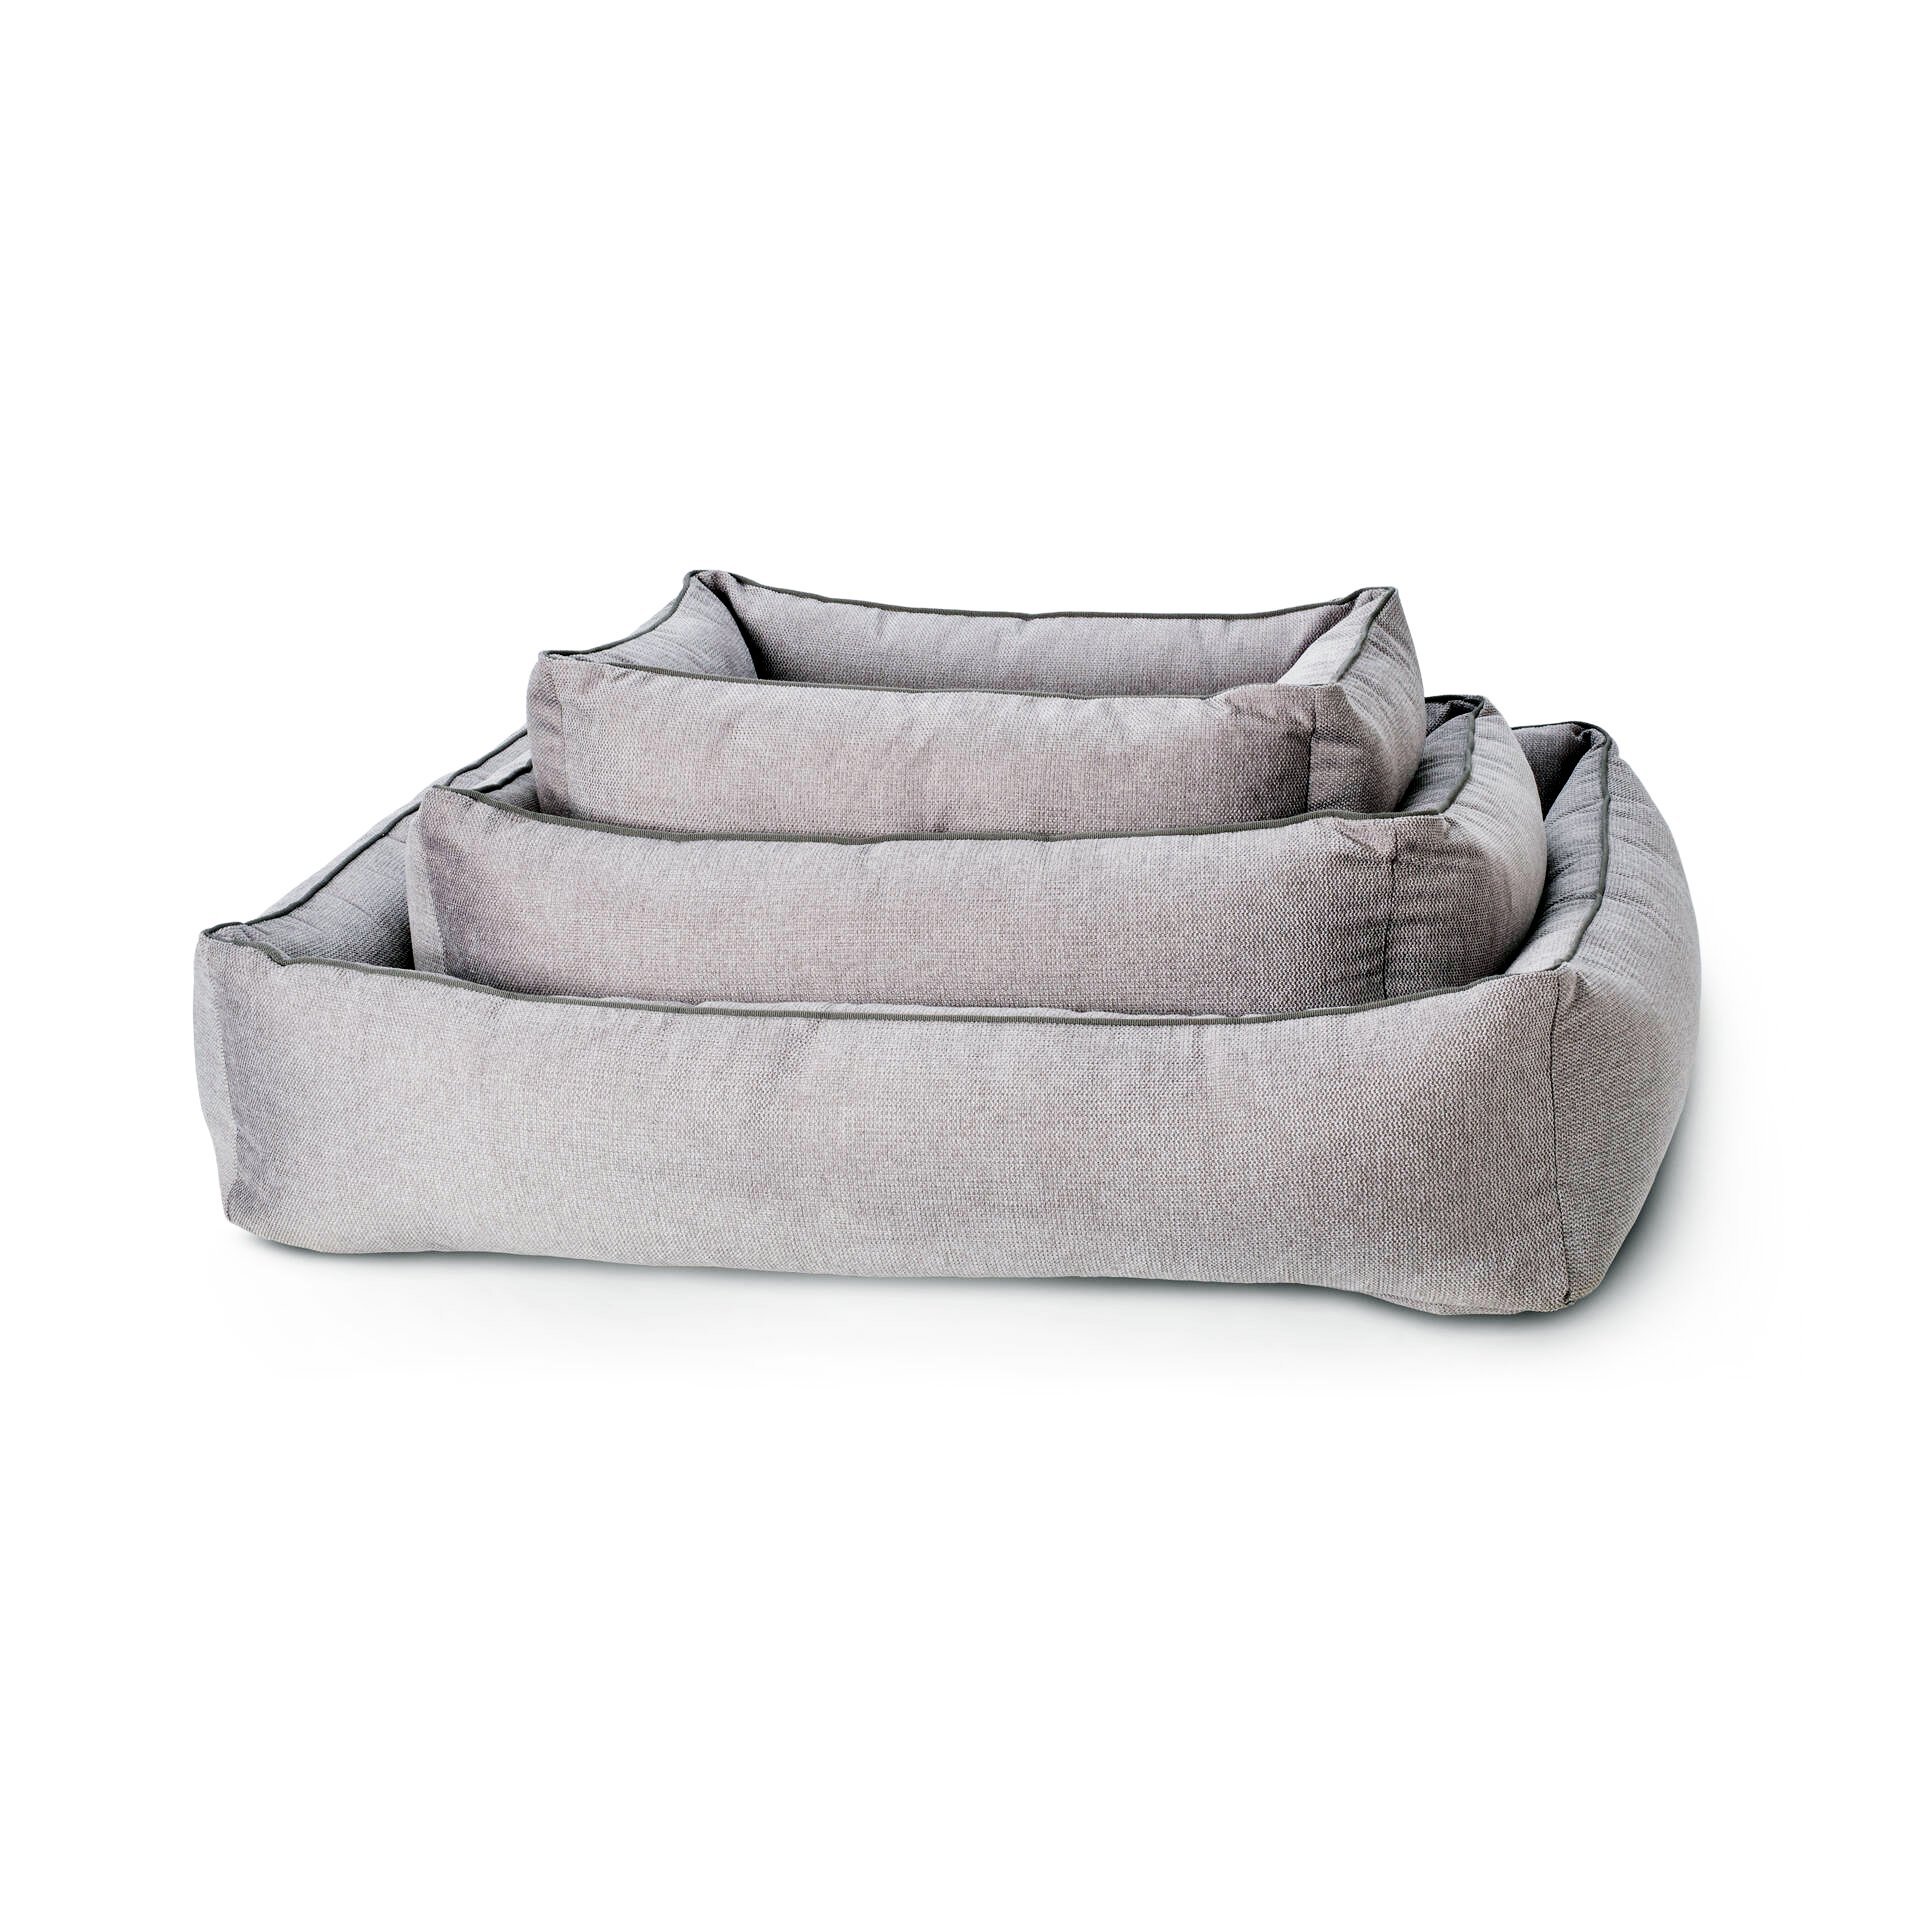 Classic Eco dog bed